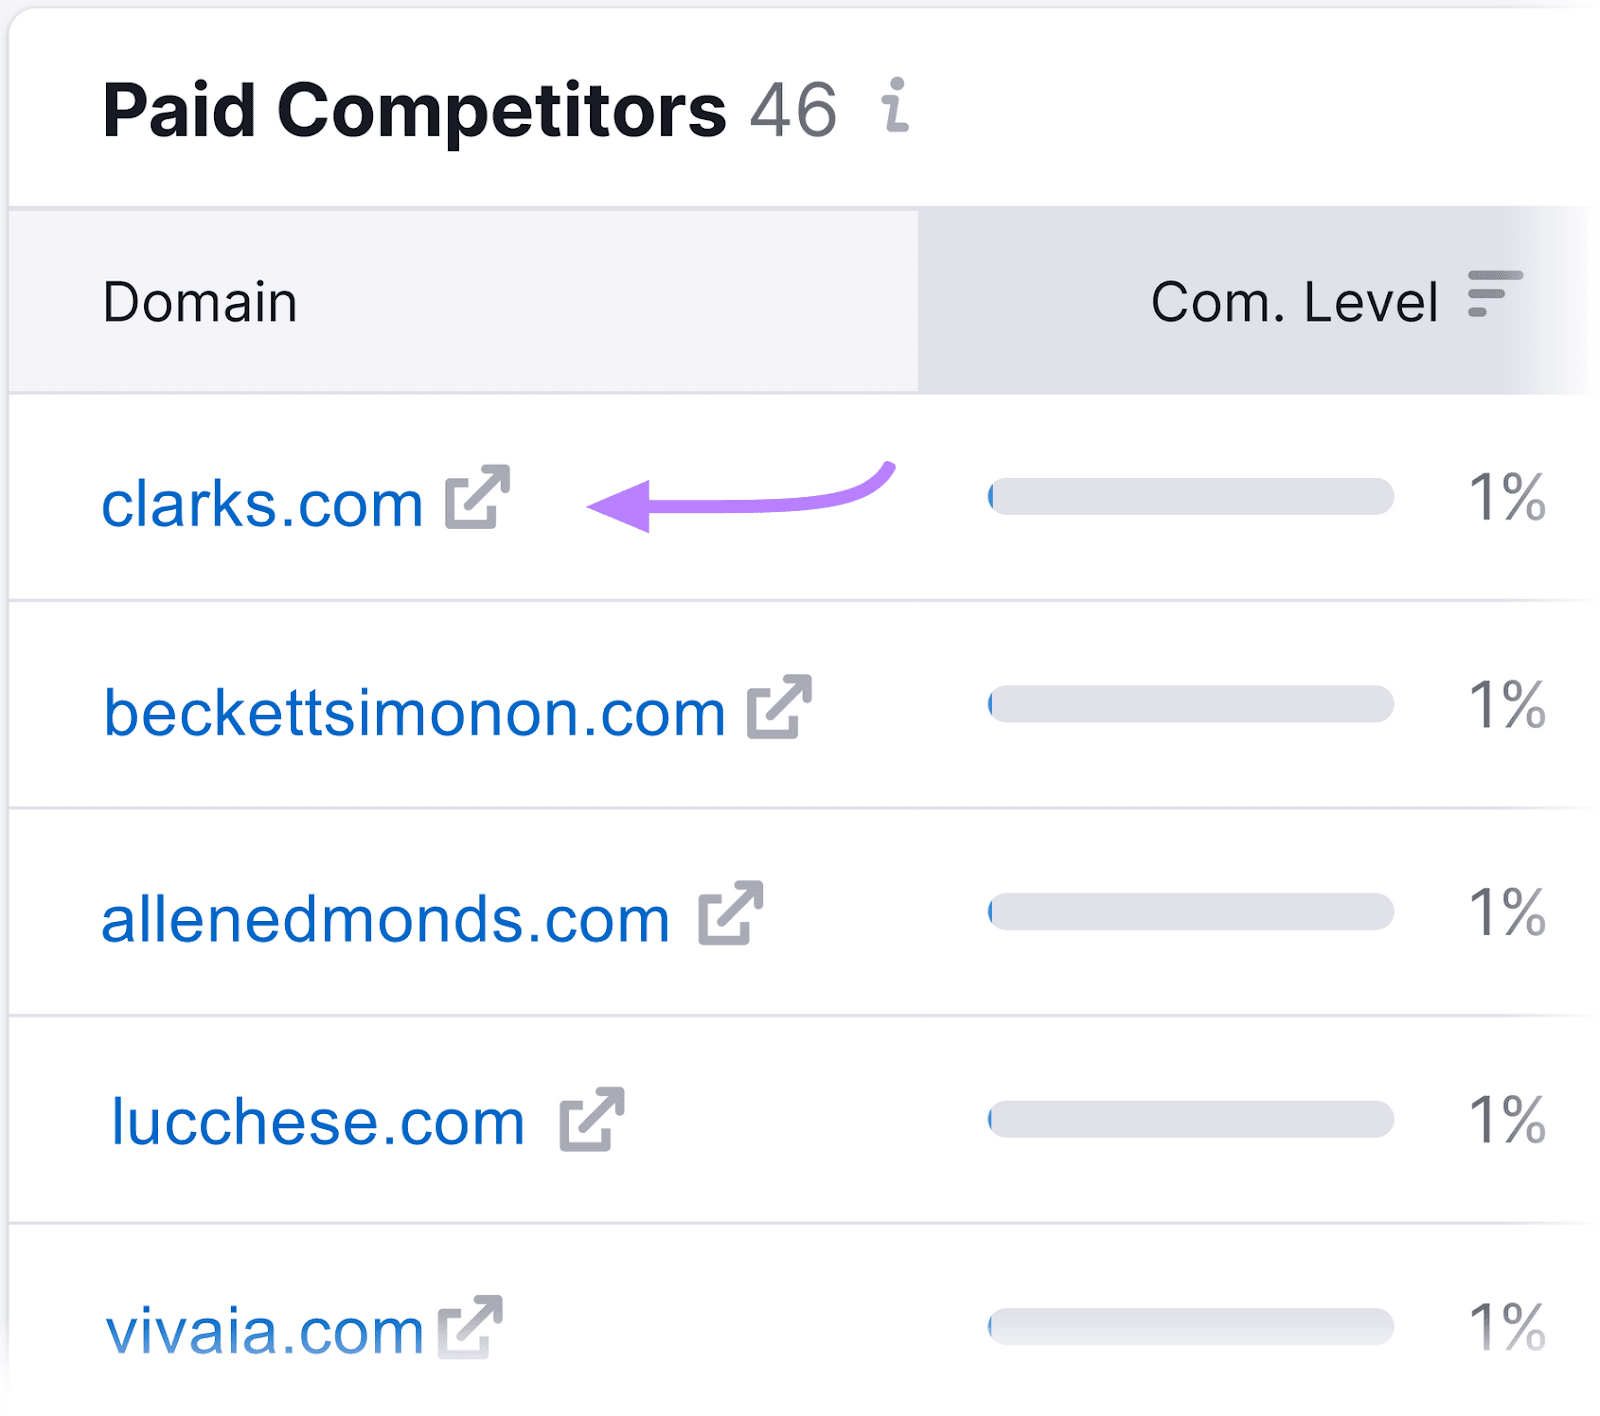 "clarks.com" domain selected from the "Paid Competitors" table